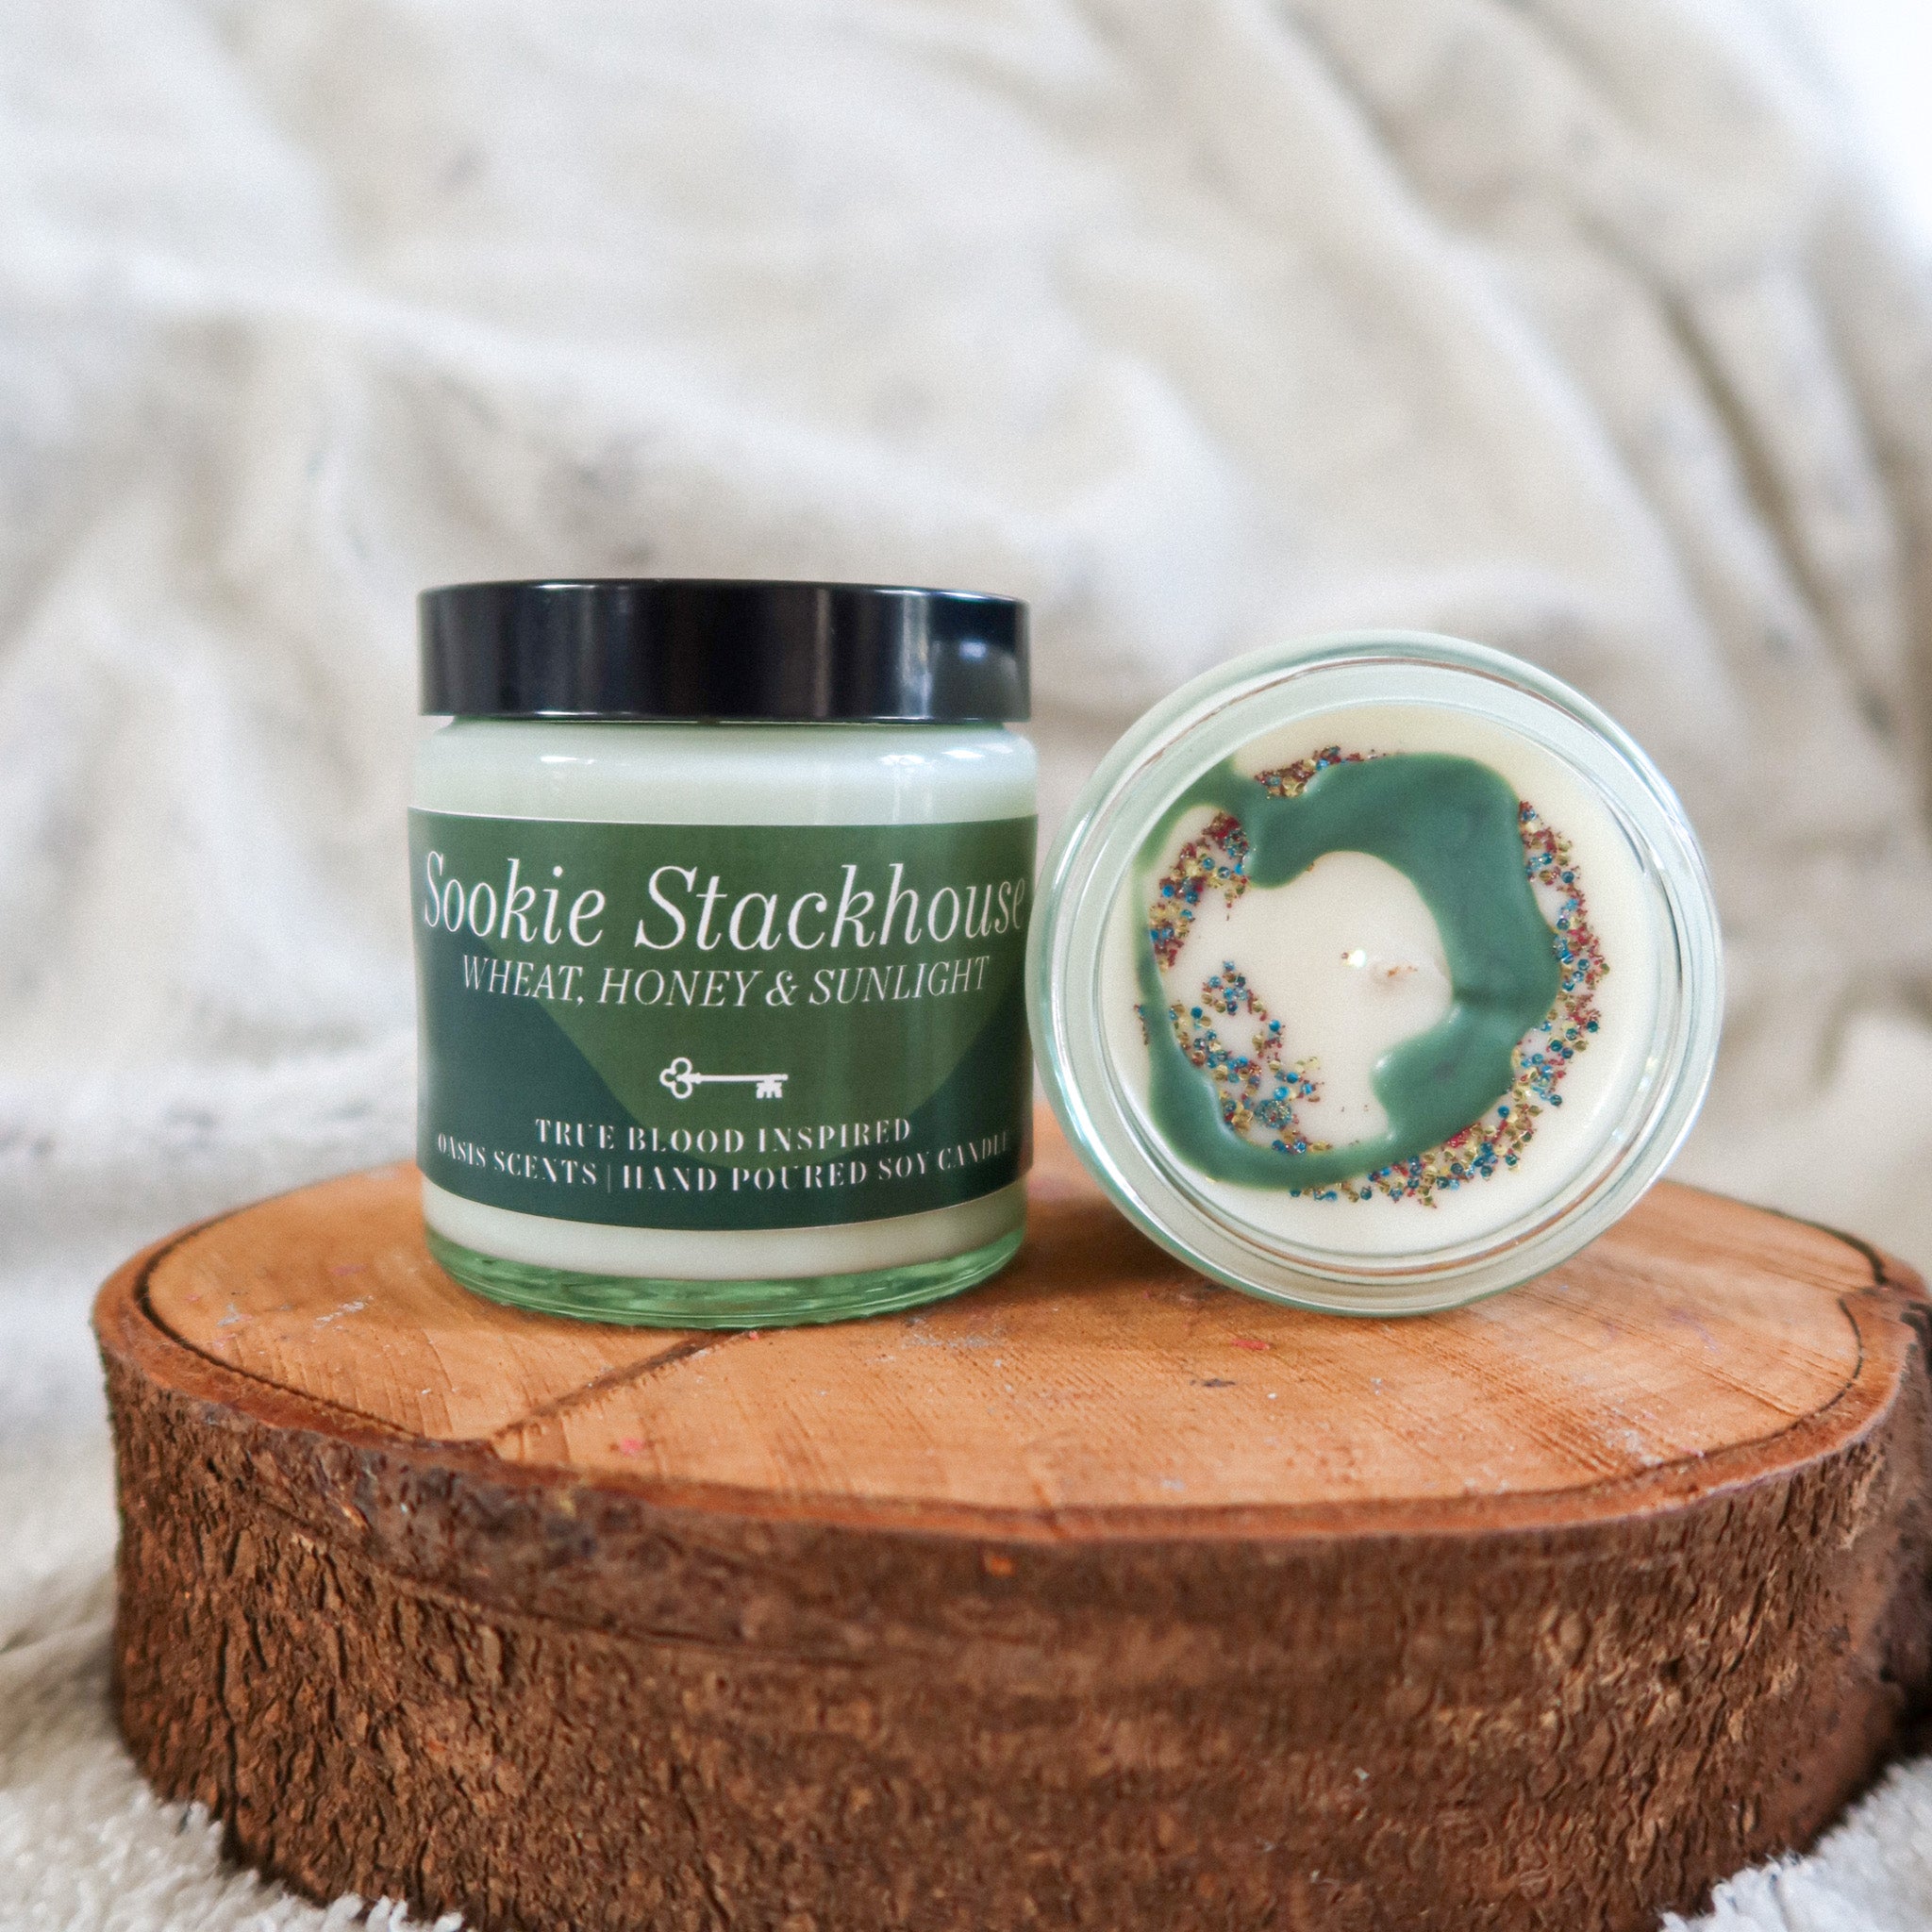 Sookie Stackhouse Soy Candle